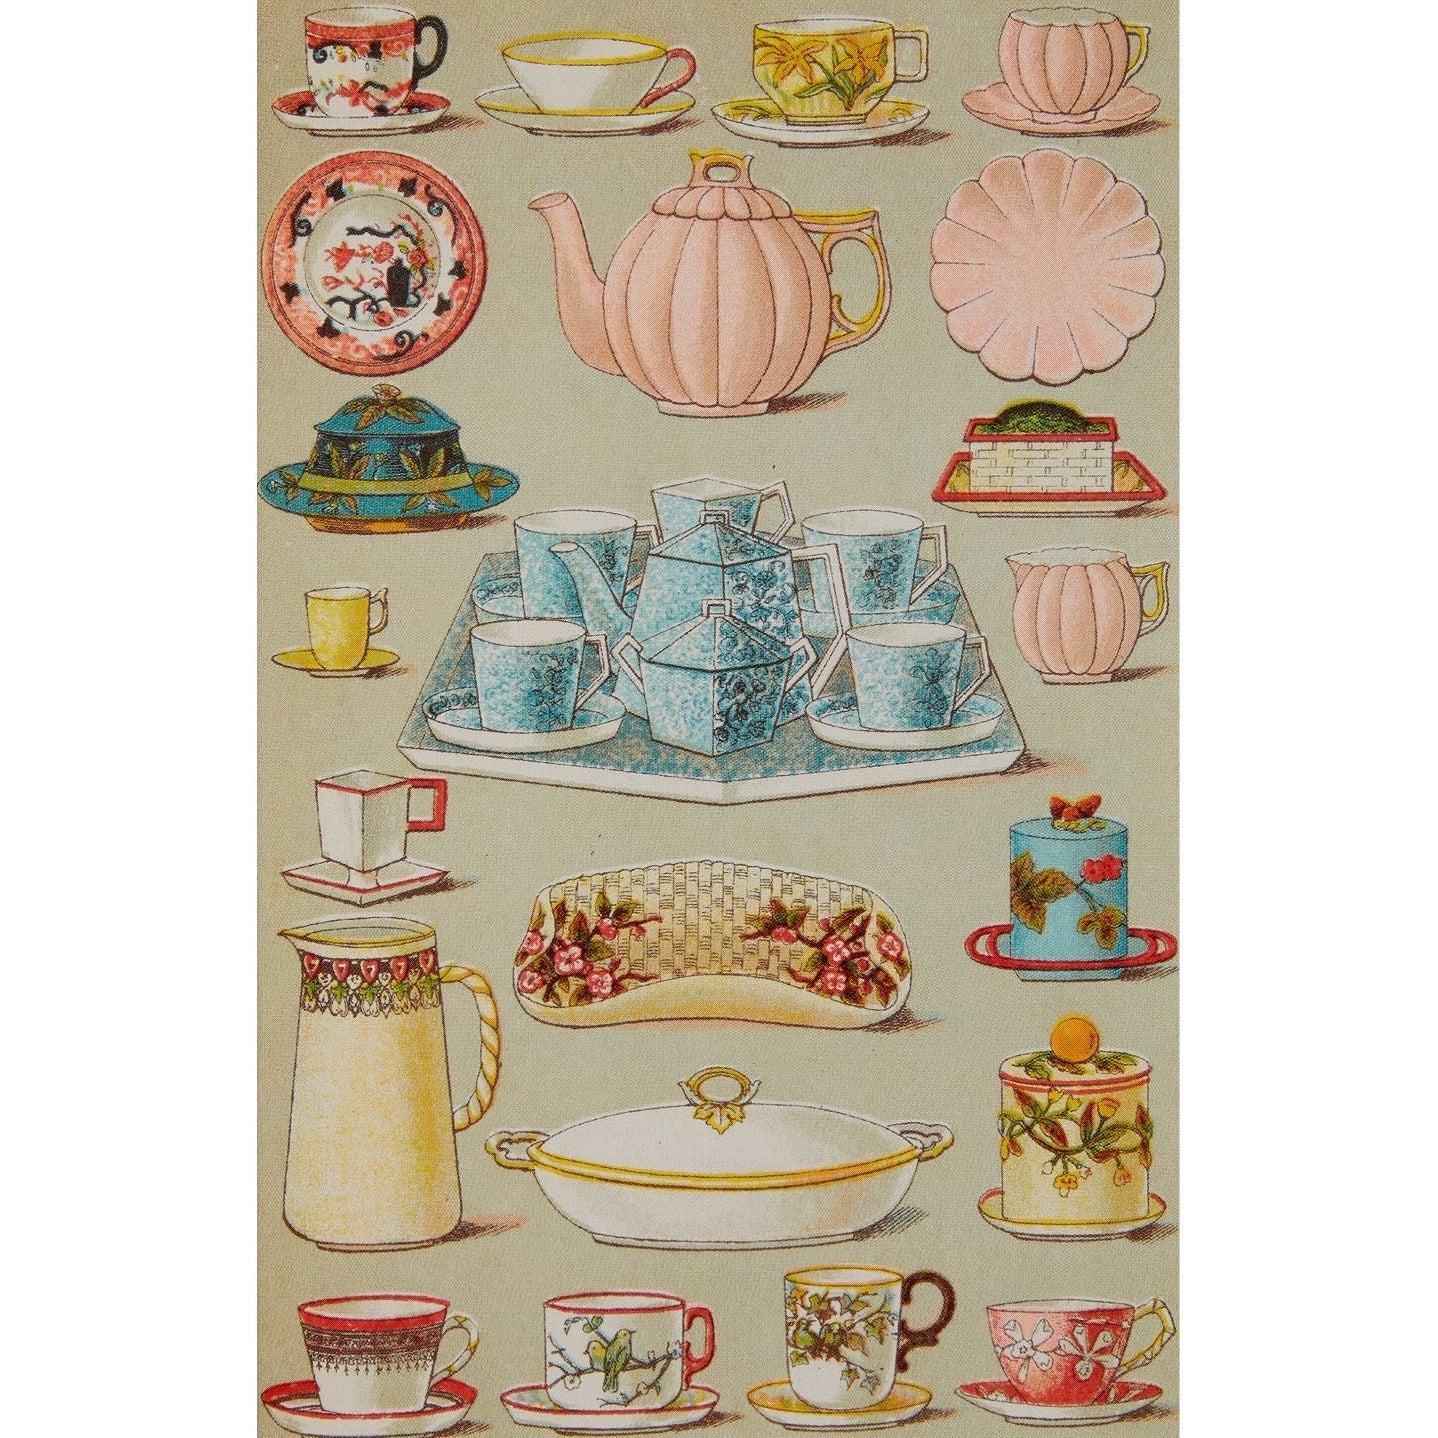 Notecard - Mrs Beeton's Book of Household Management, Breakfast and Tea China illustration. From the collection of Cambridge University Library, brought to you by CuratingCambridge.co.uk